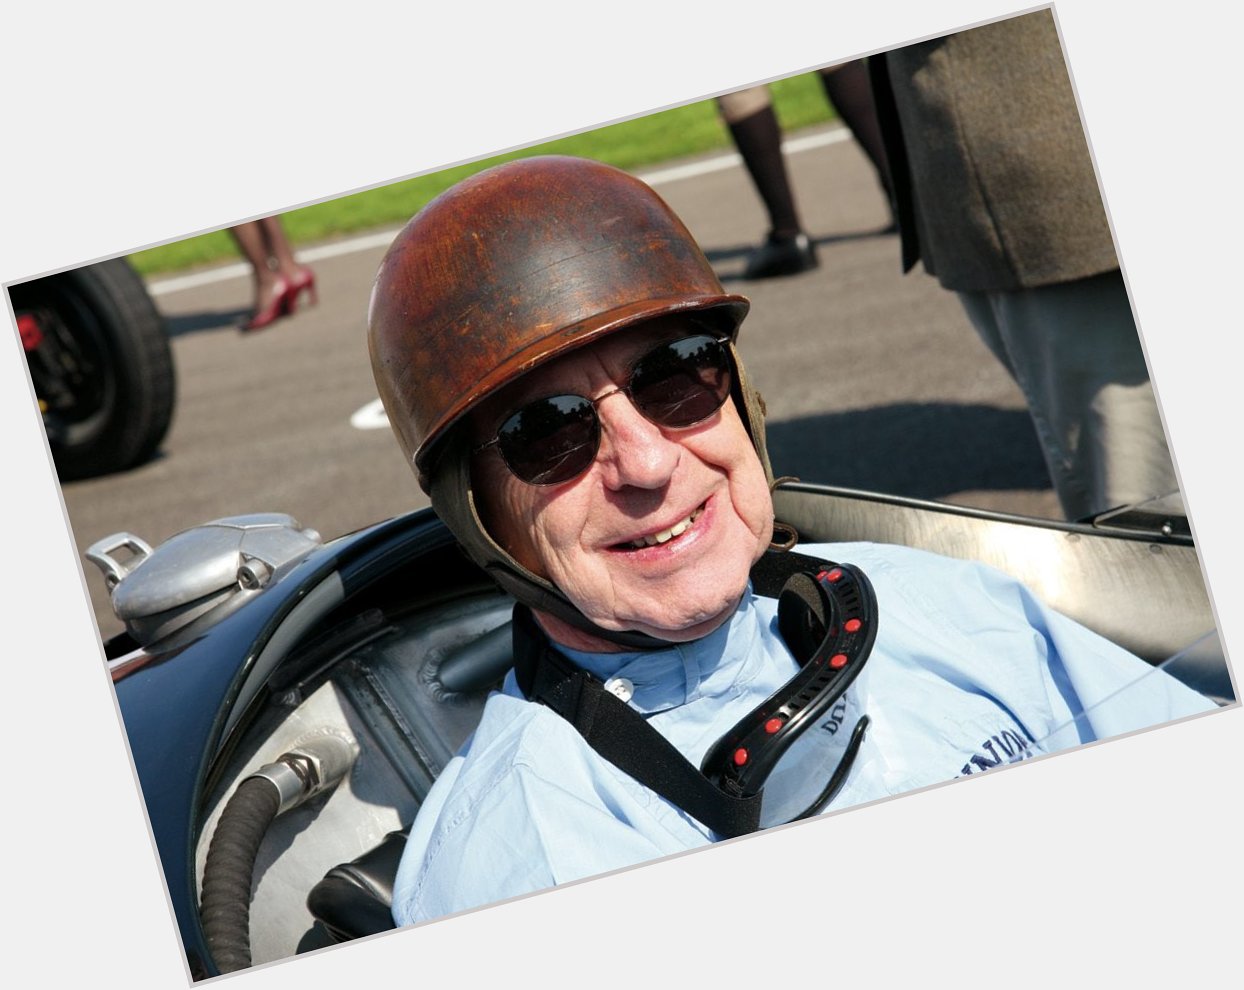 On behalf of the Club we would like to wish BRDC Member Tony Brooks a very Happy 90th Birthday.   